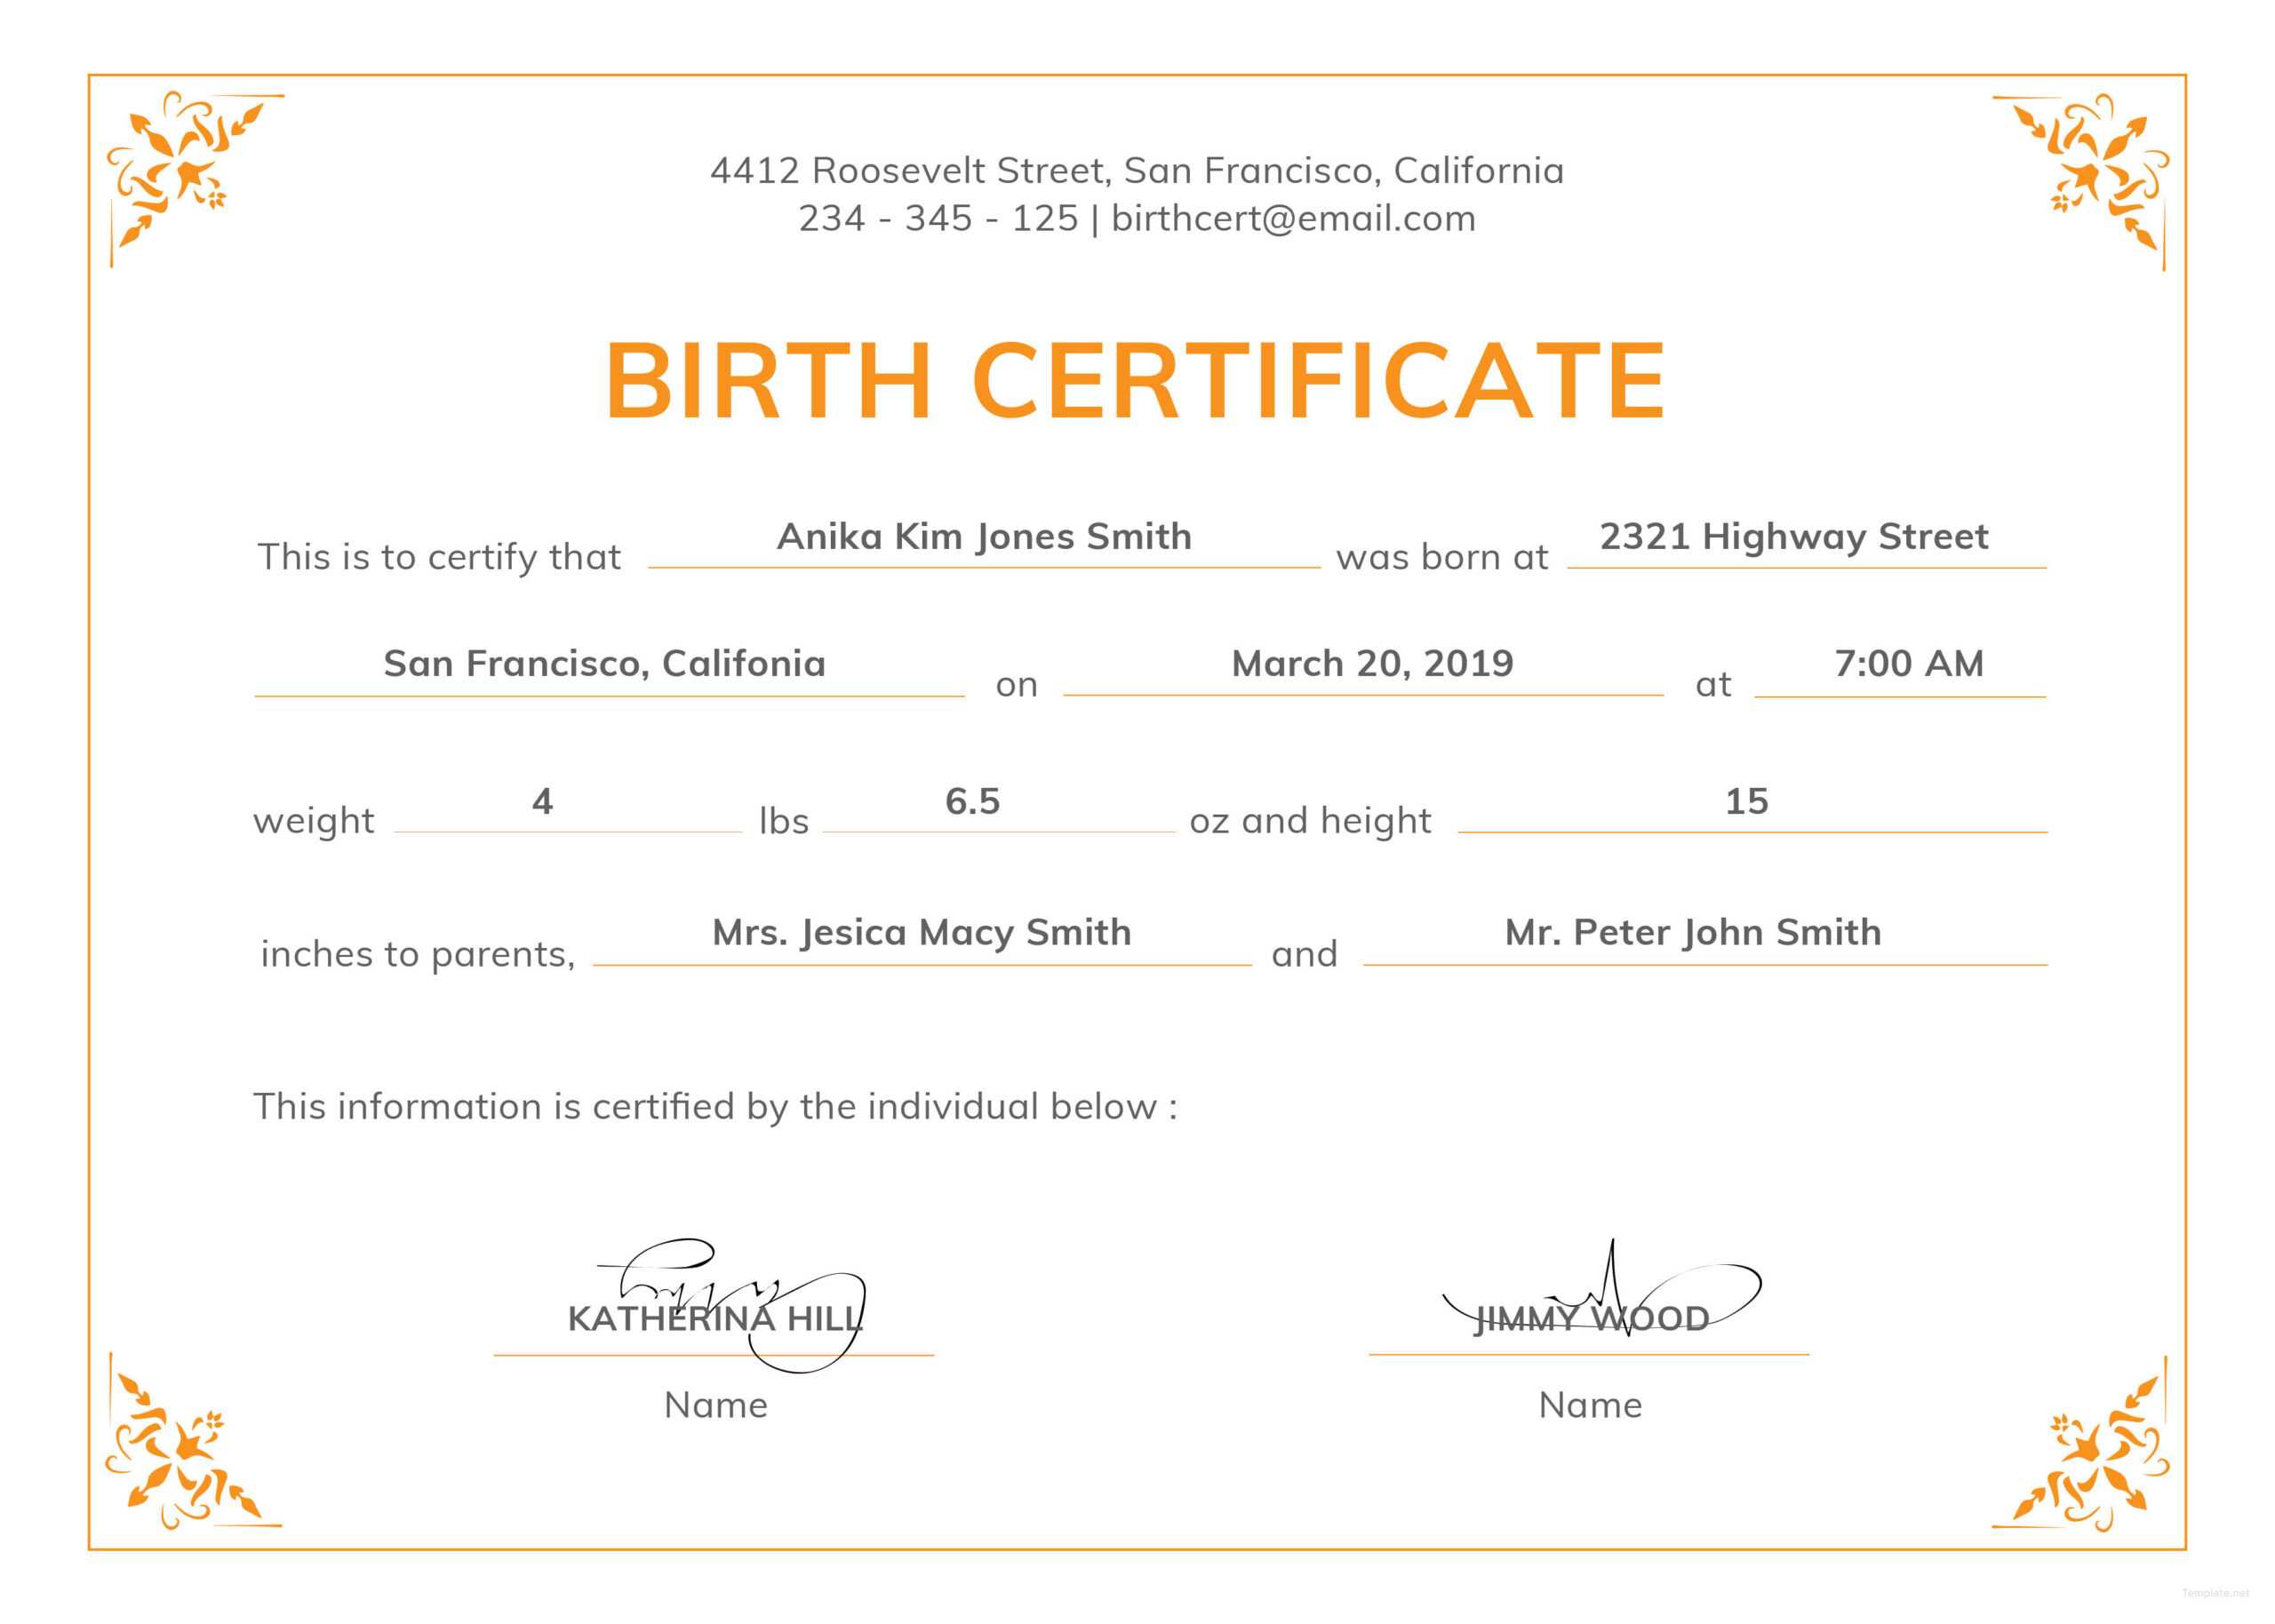 Can Make A Delivery Certificate Crucial | Gift Certificate Within Official Birth Certificate Template